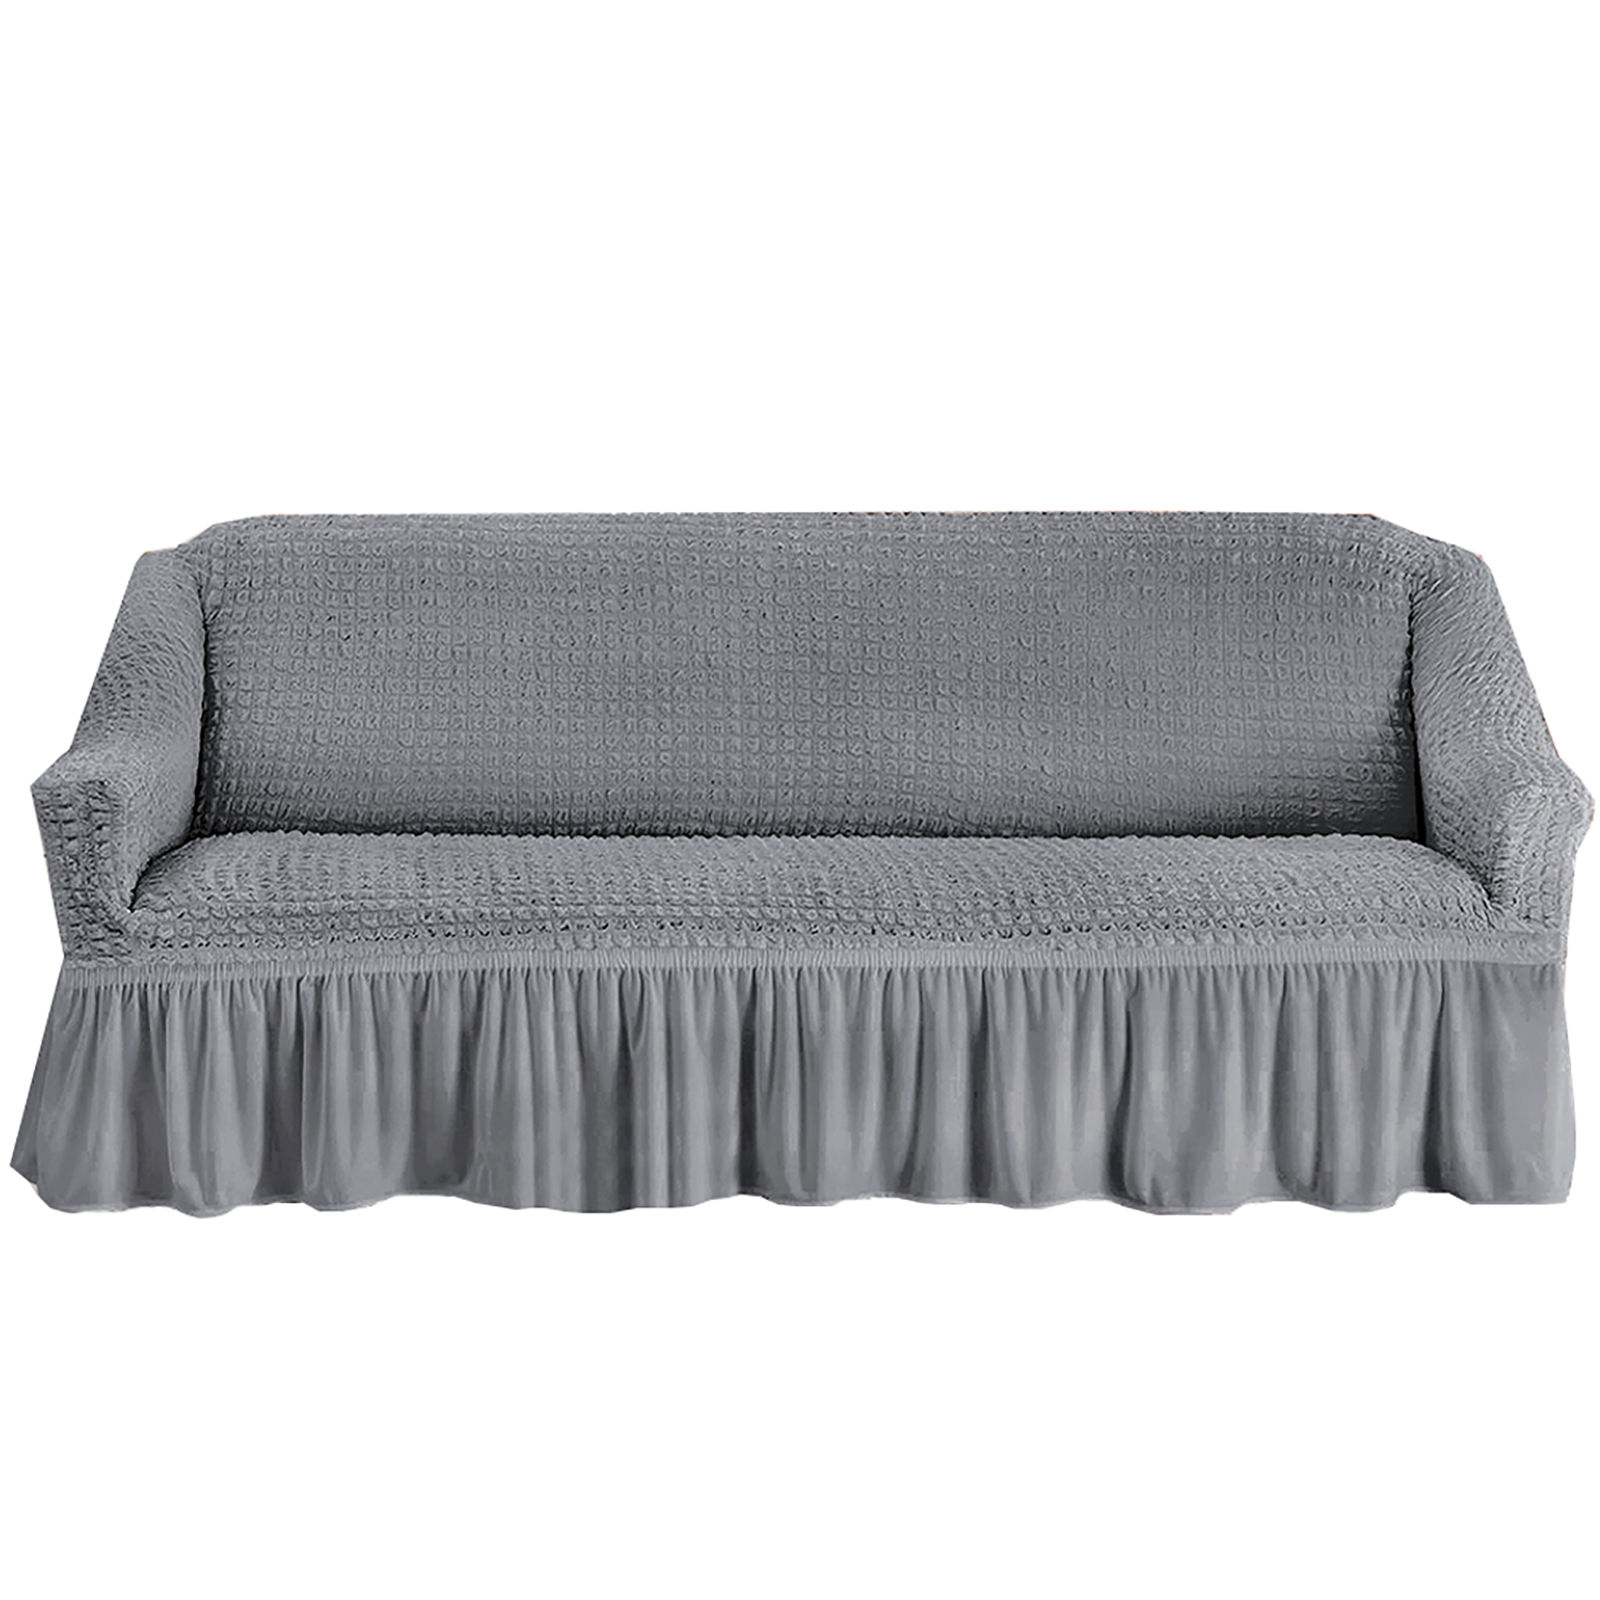 Stretch Sofa Slipcover, 3 Seater Sofa Slipcovers With Skirt With Armless Soft Sofa Cover Elastic Straps Sofa Slipcover For Living Room Kids Pets-Gray B-X-Large